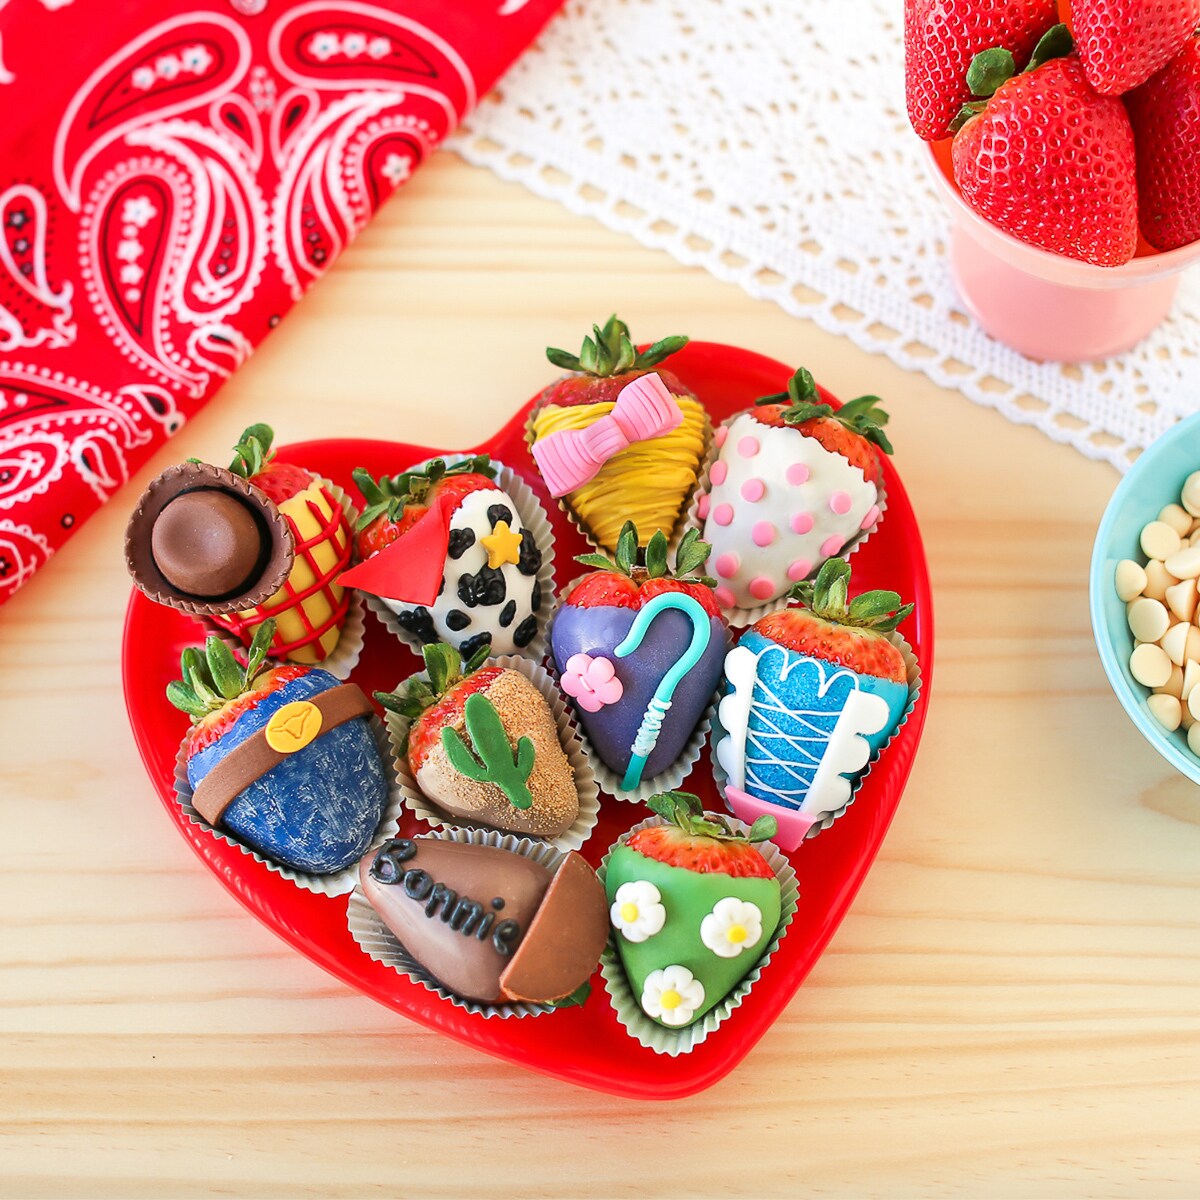 Several chocolate covered strawberries inspired by Toy Story 4 in a heart shaped plate.